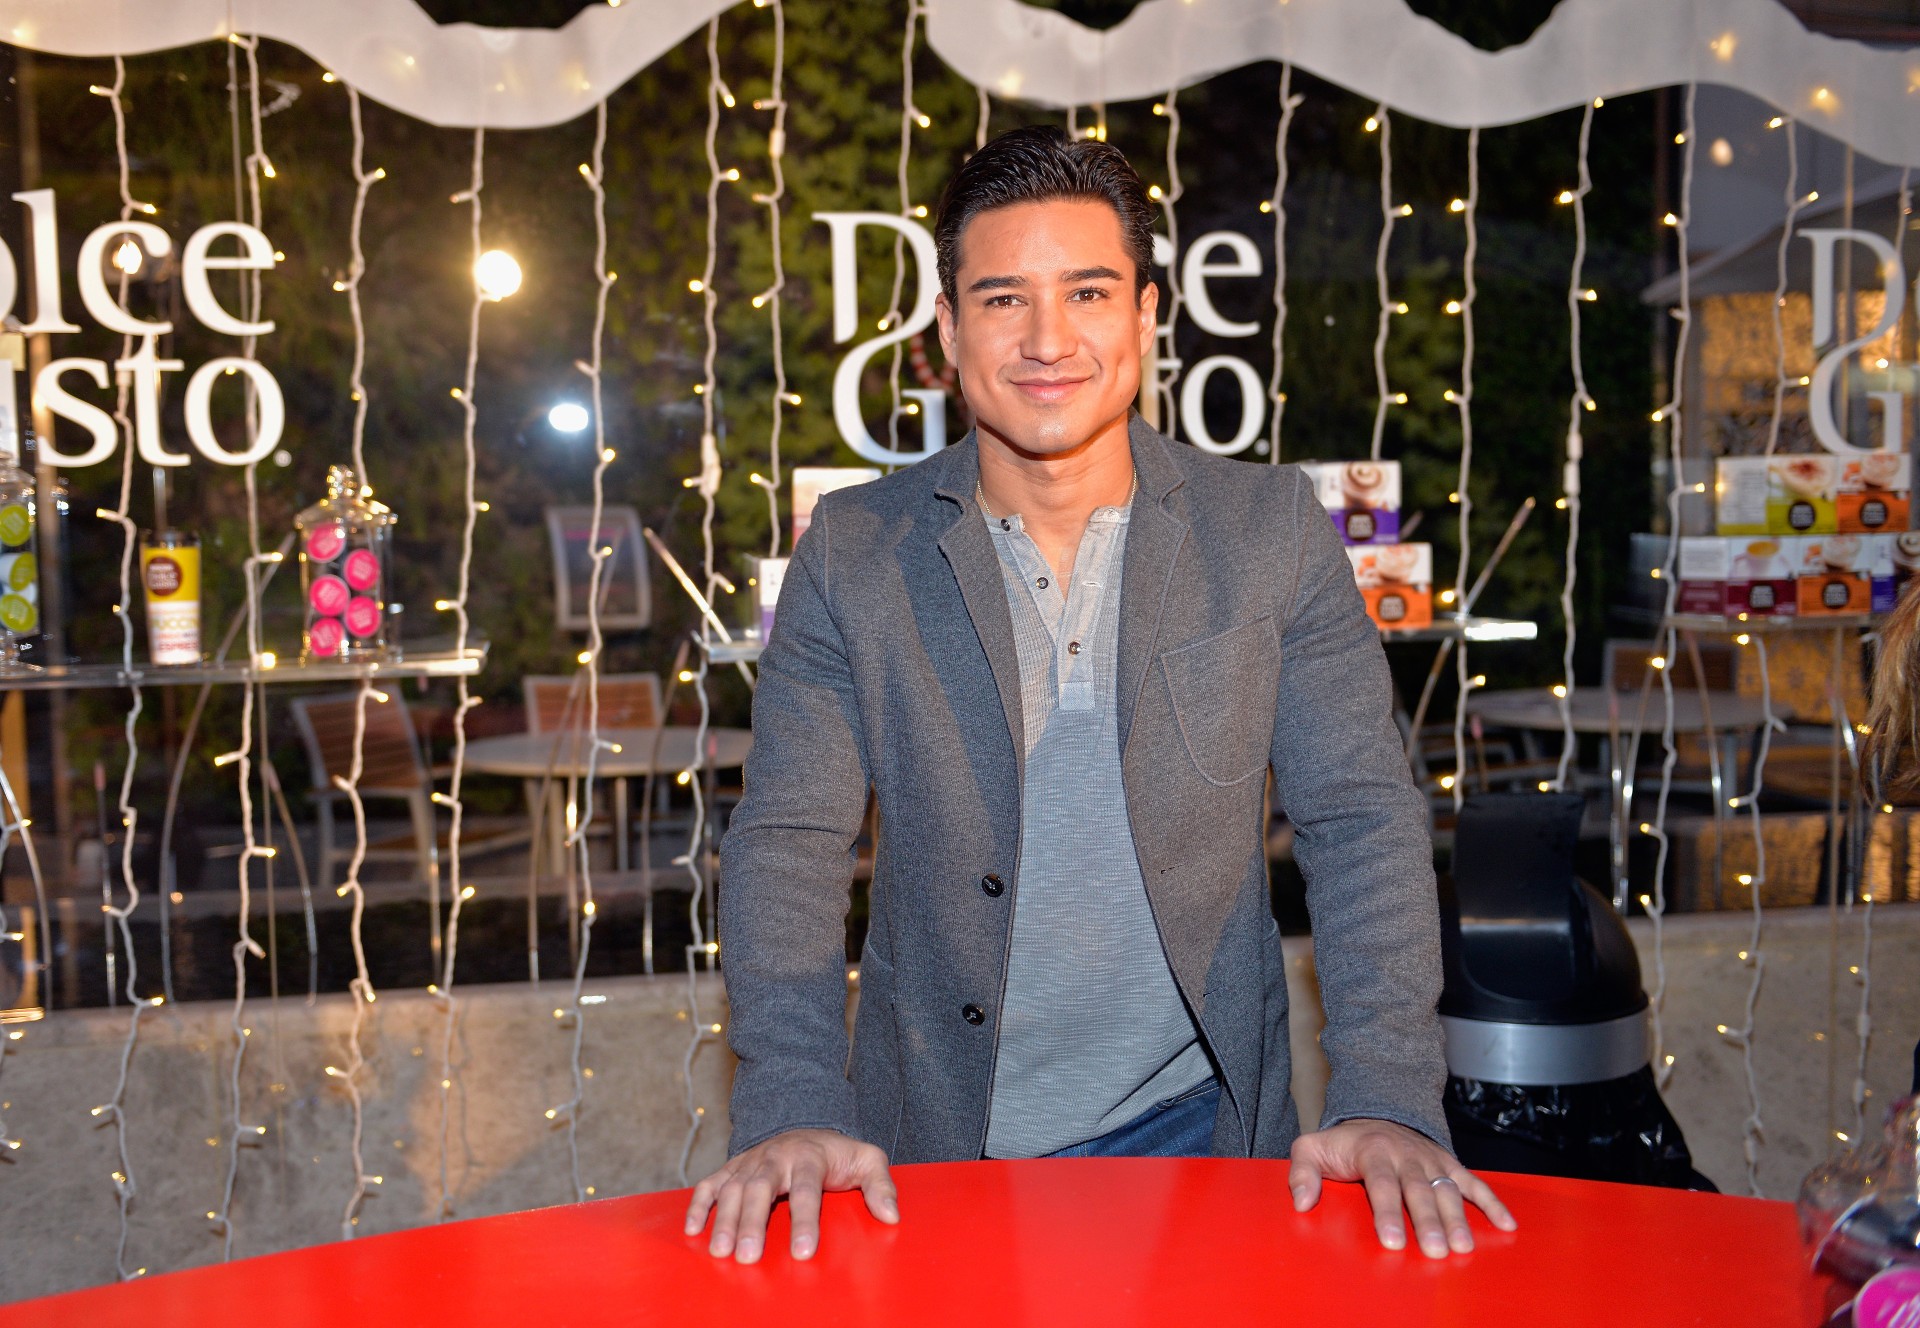 Mario Lopez smiles while at an event.